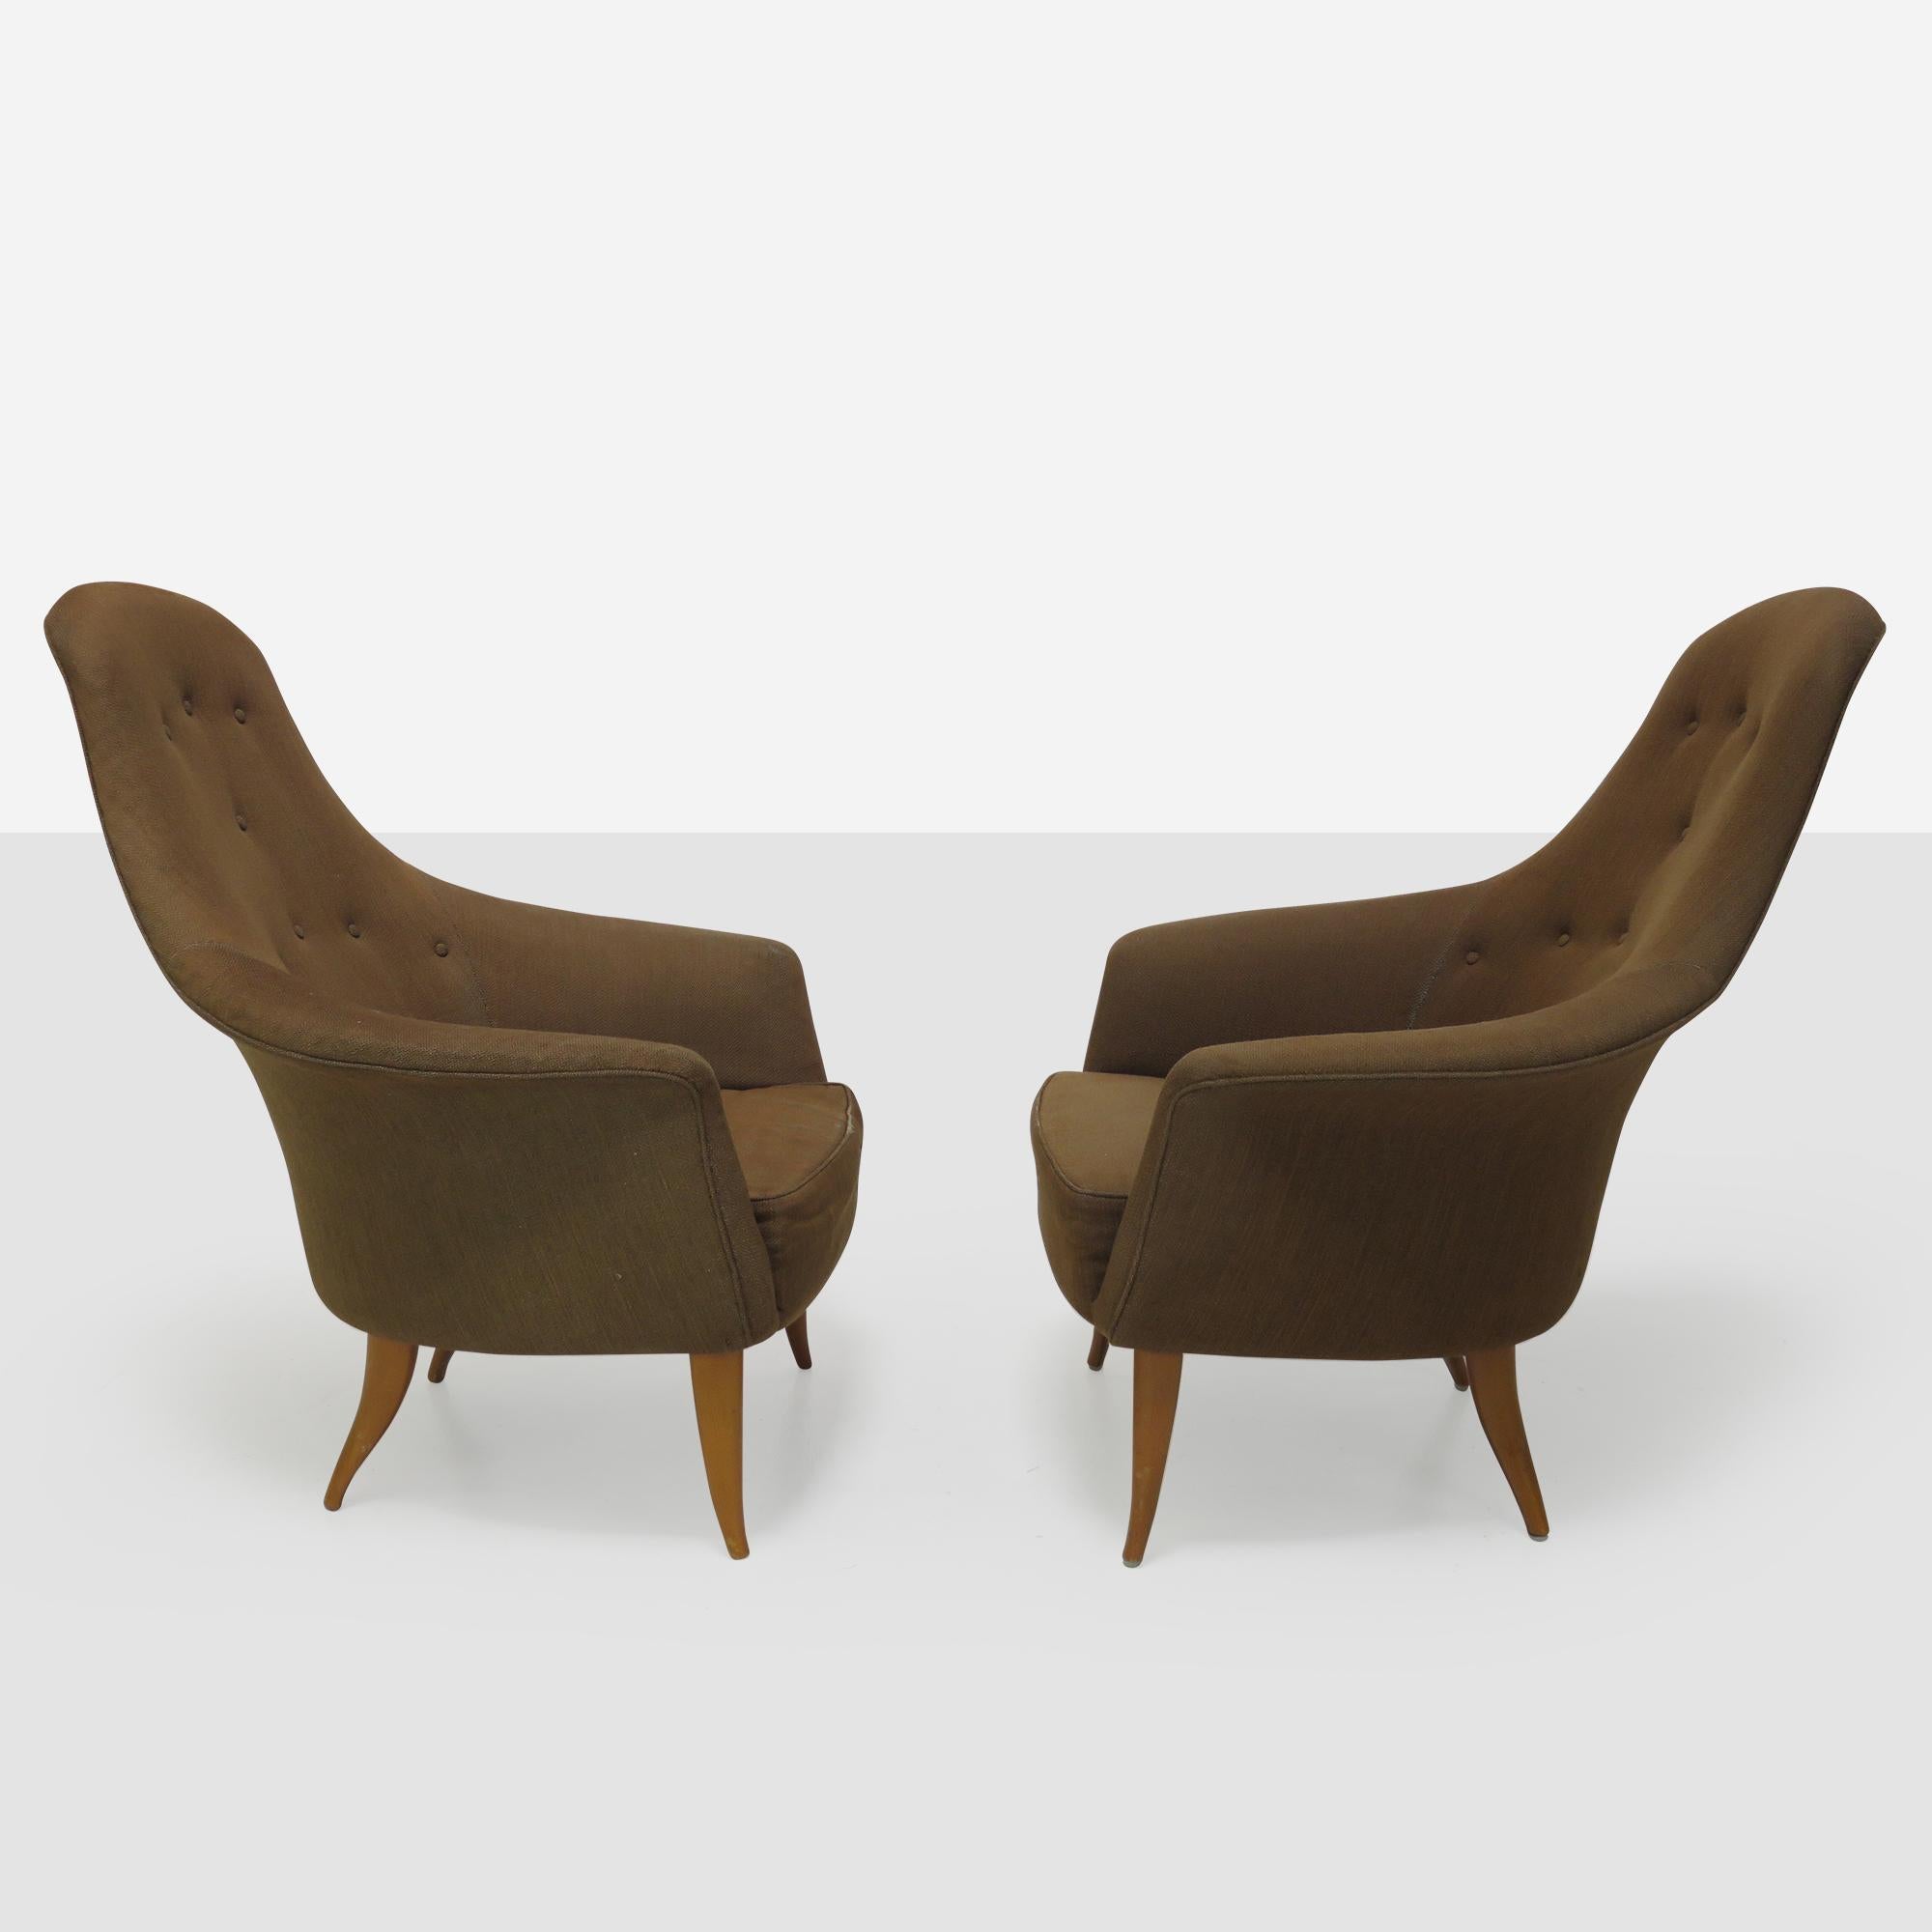 Mid-20th Century Kerstin Horlin-Holmquist Pair of Lounge Chairs For Sale